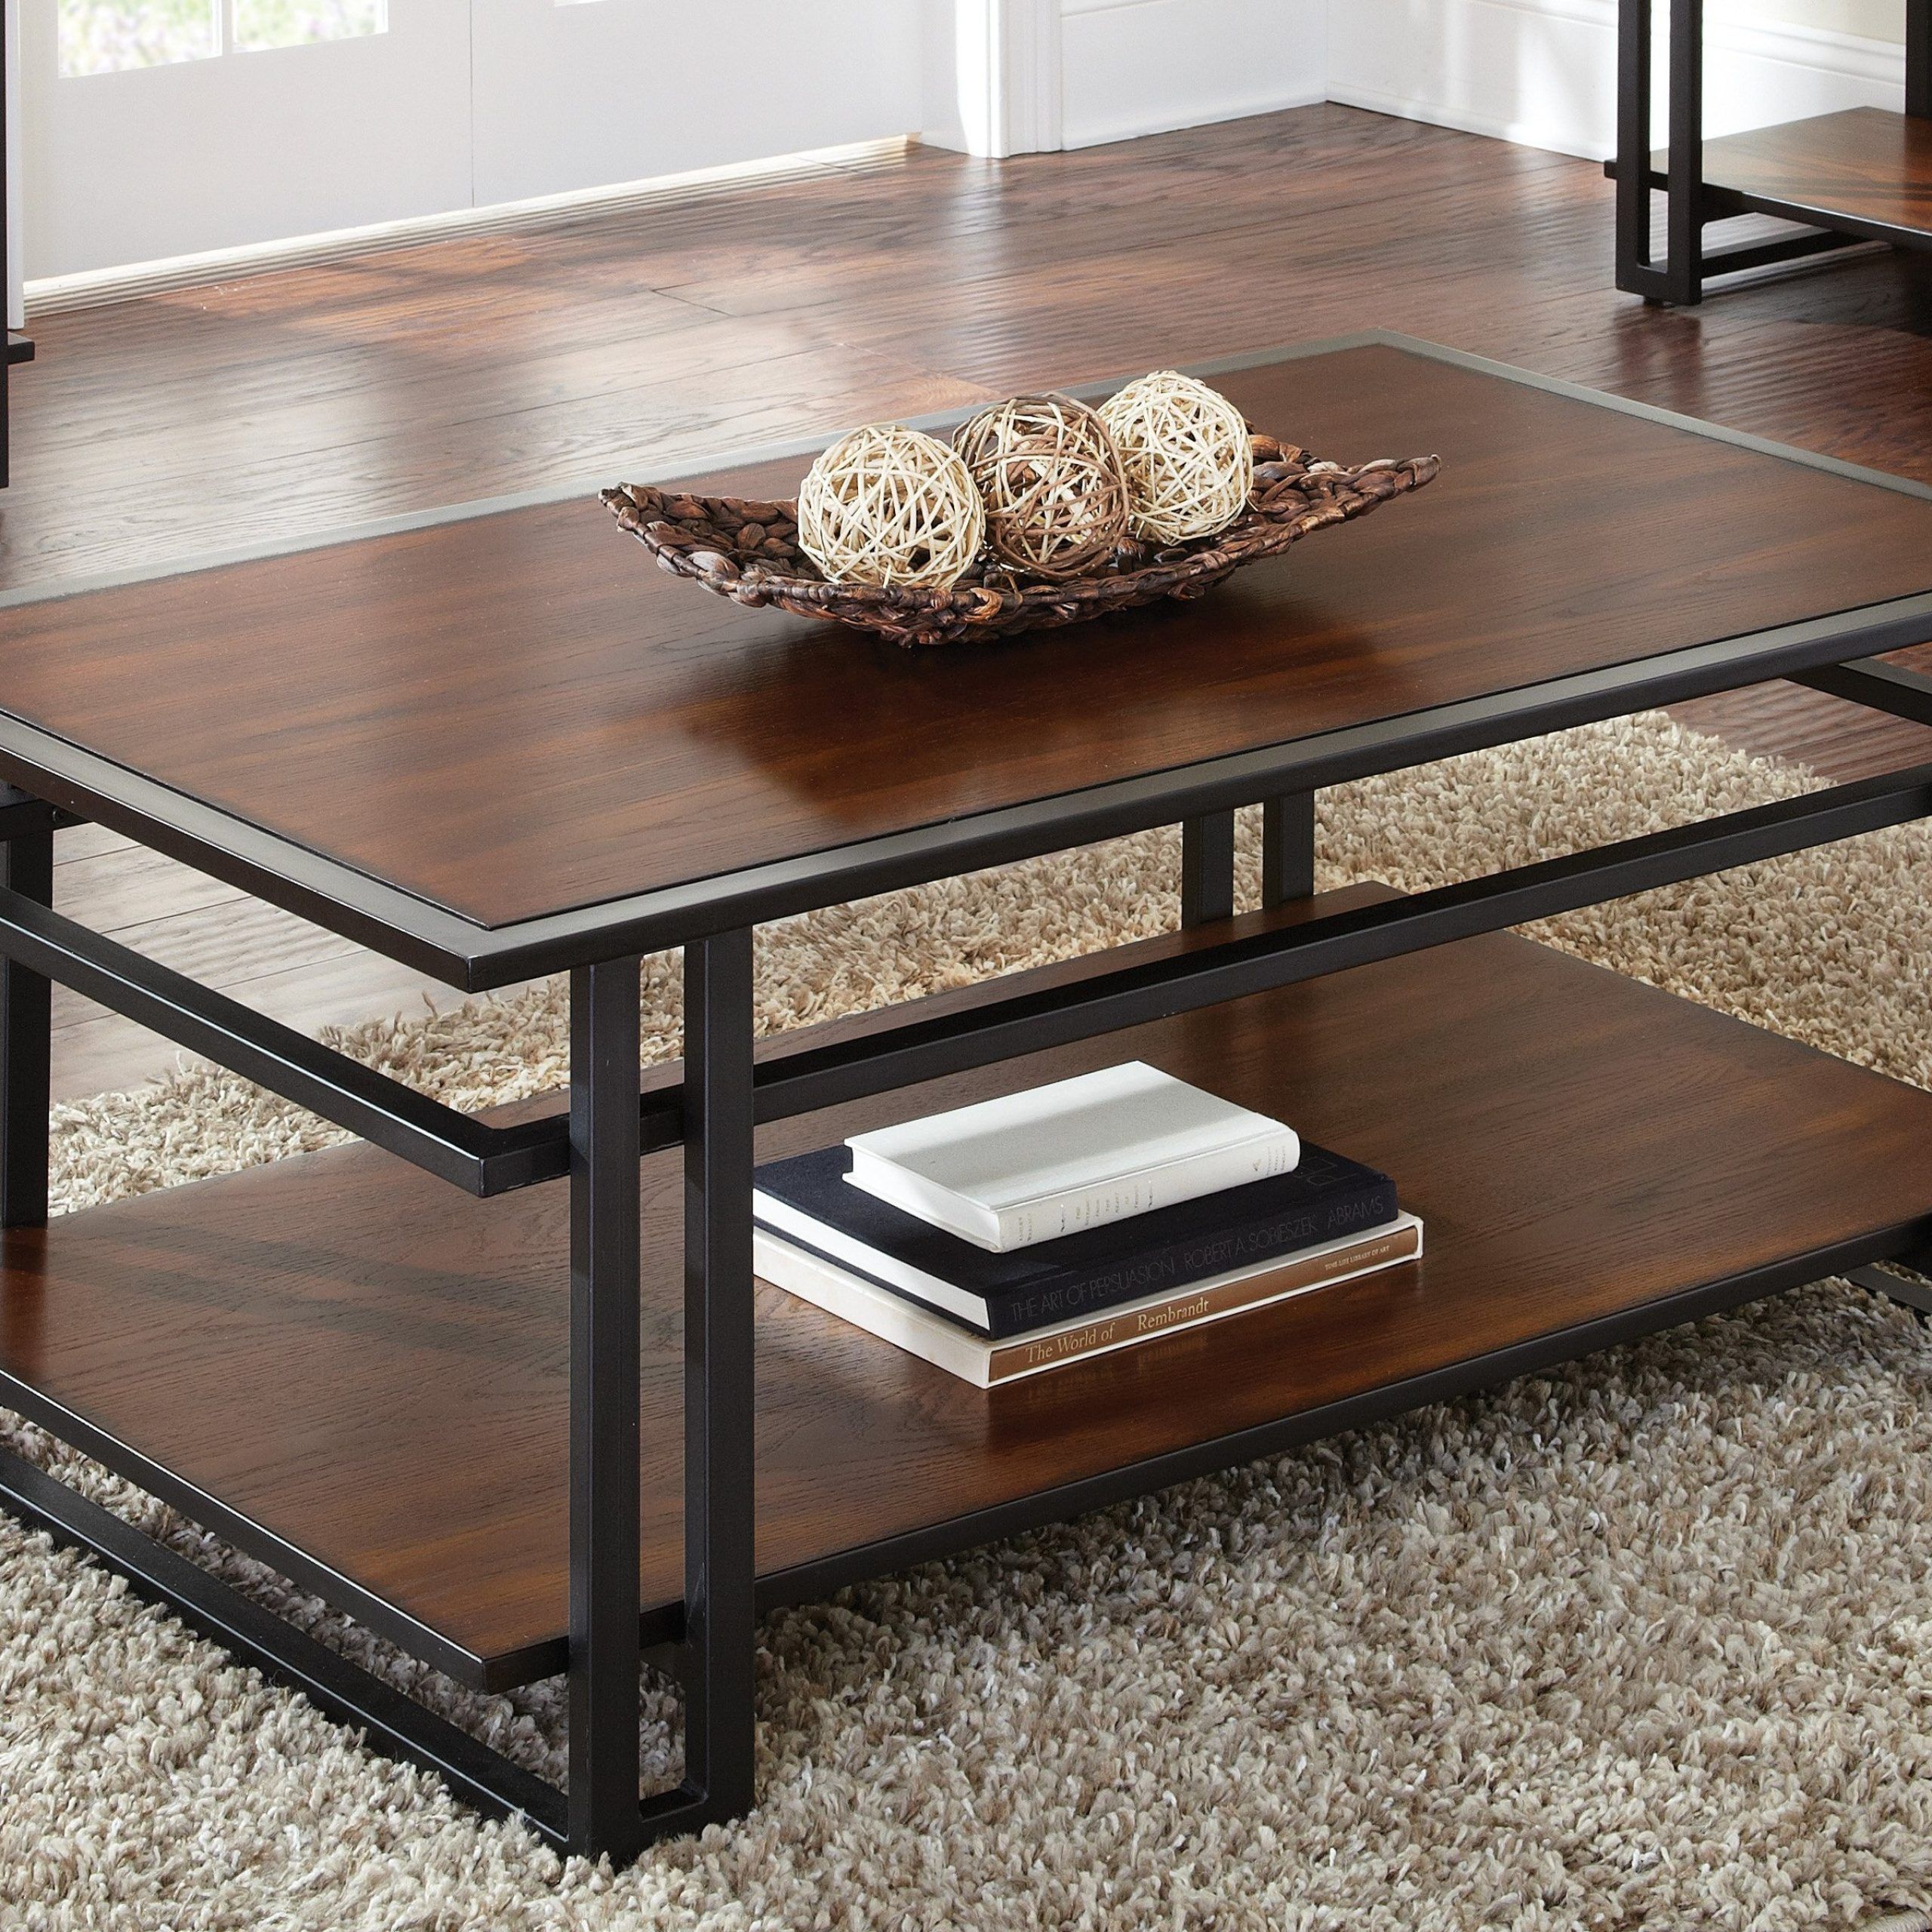 Cherry Wood Coffee Table Design Images Photos Pictures With Regard To Simple Design Coffee Tables (View 7 of 15)